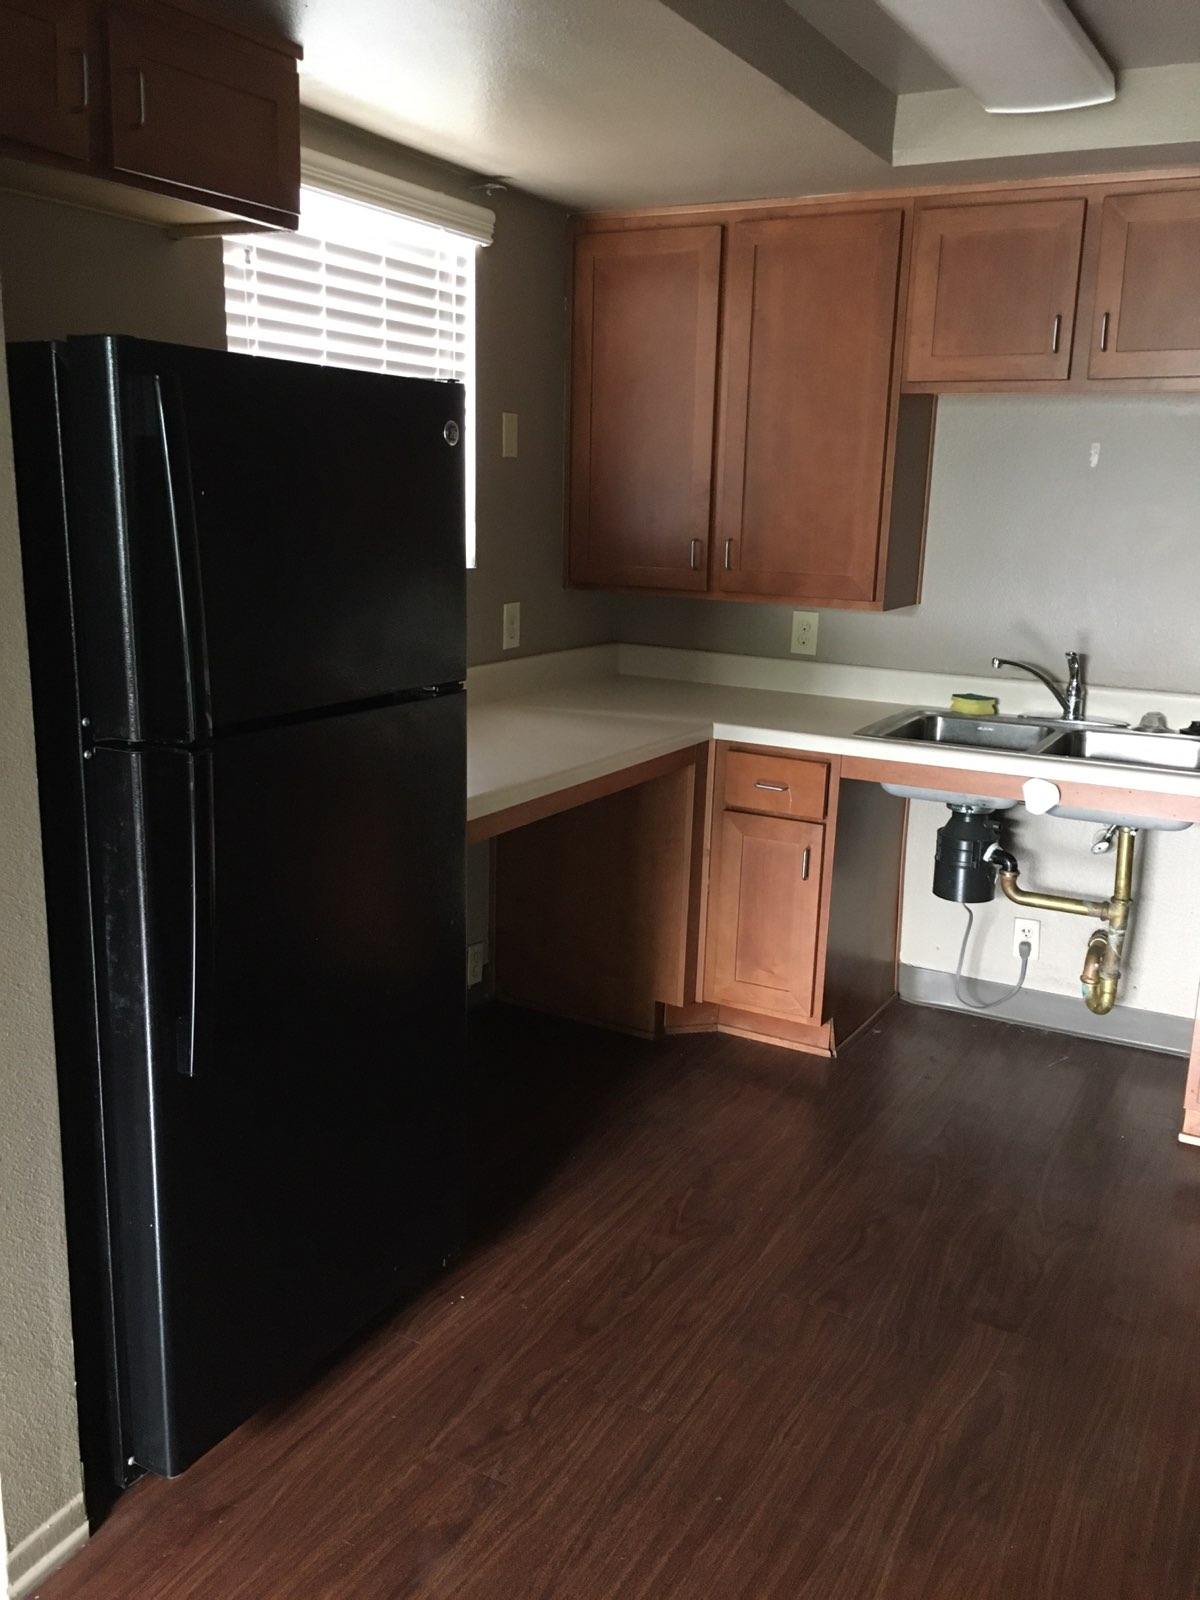 View of upper and lower kitchen cabinets, white countertops, black refrigerator, and wheelchair accessible sink.